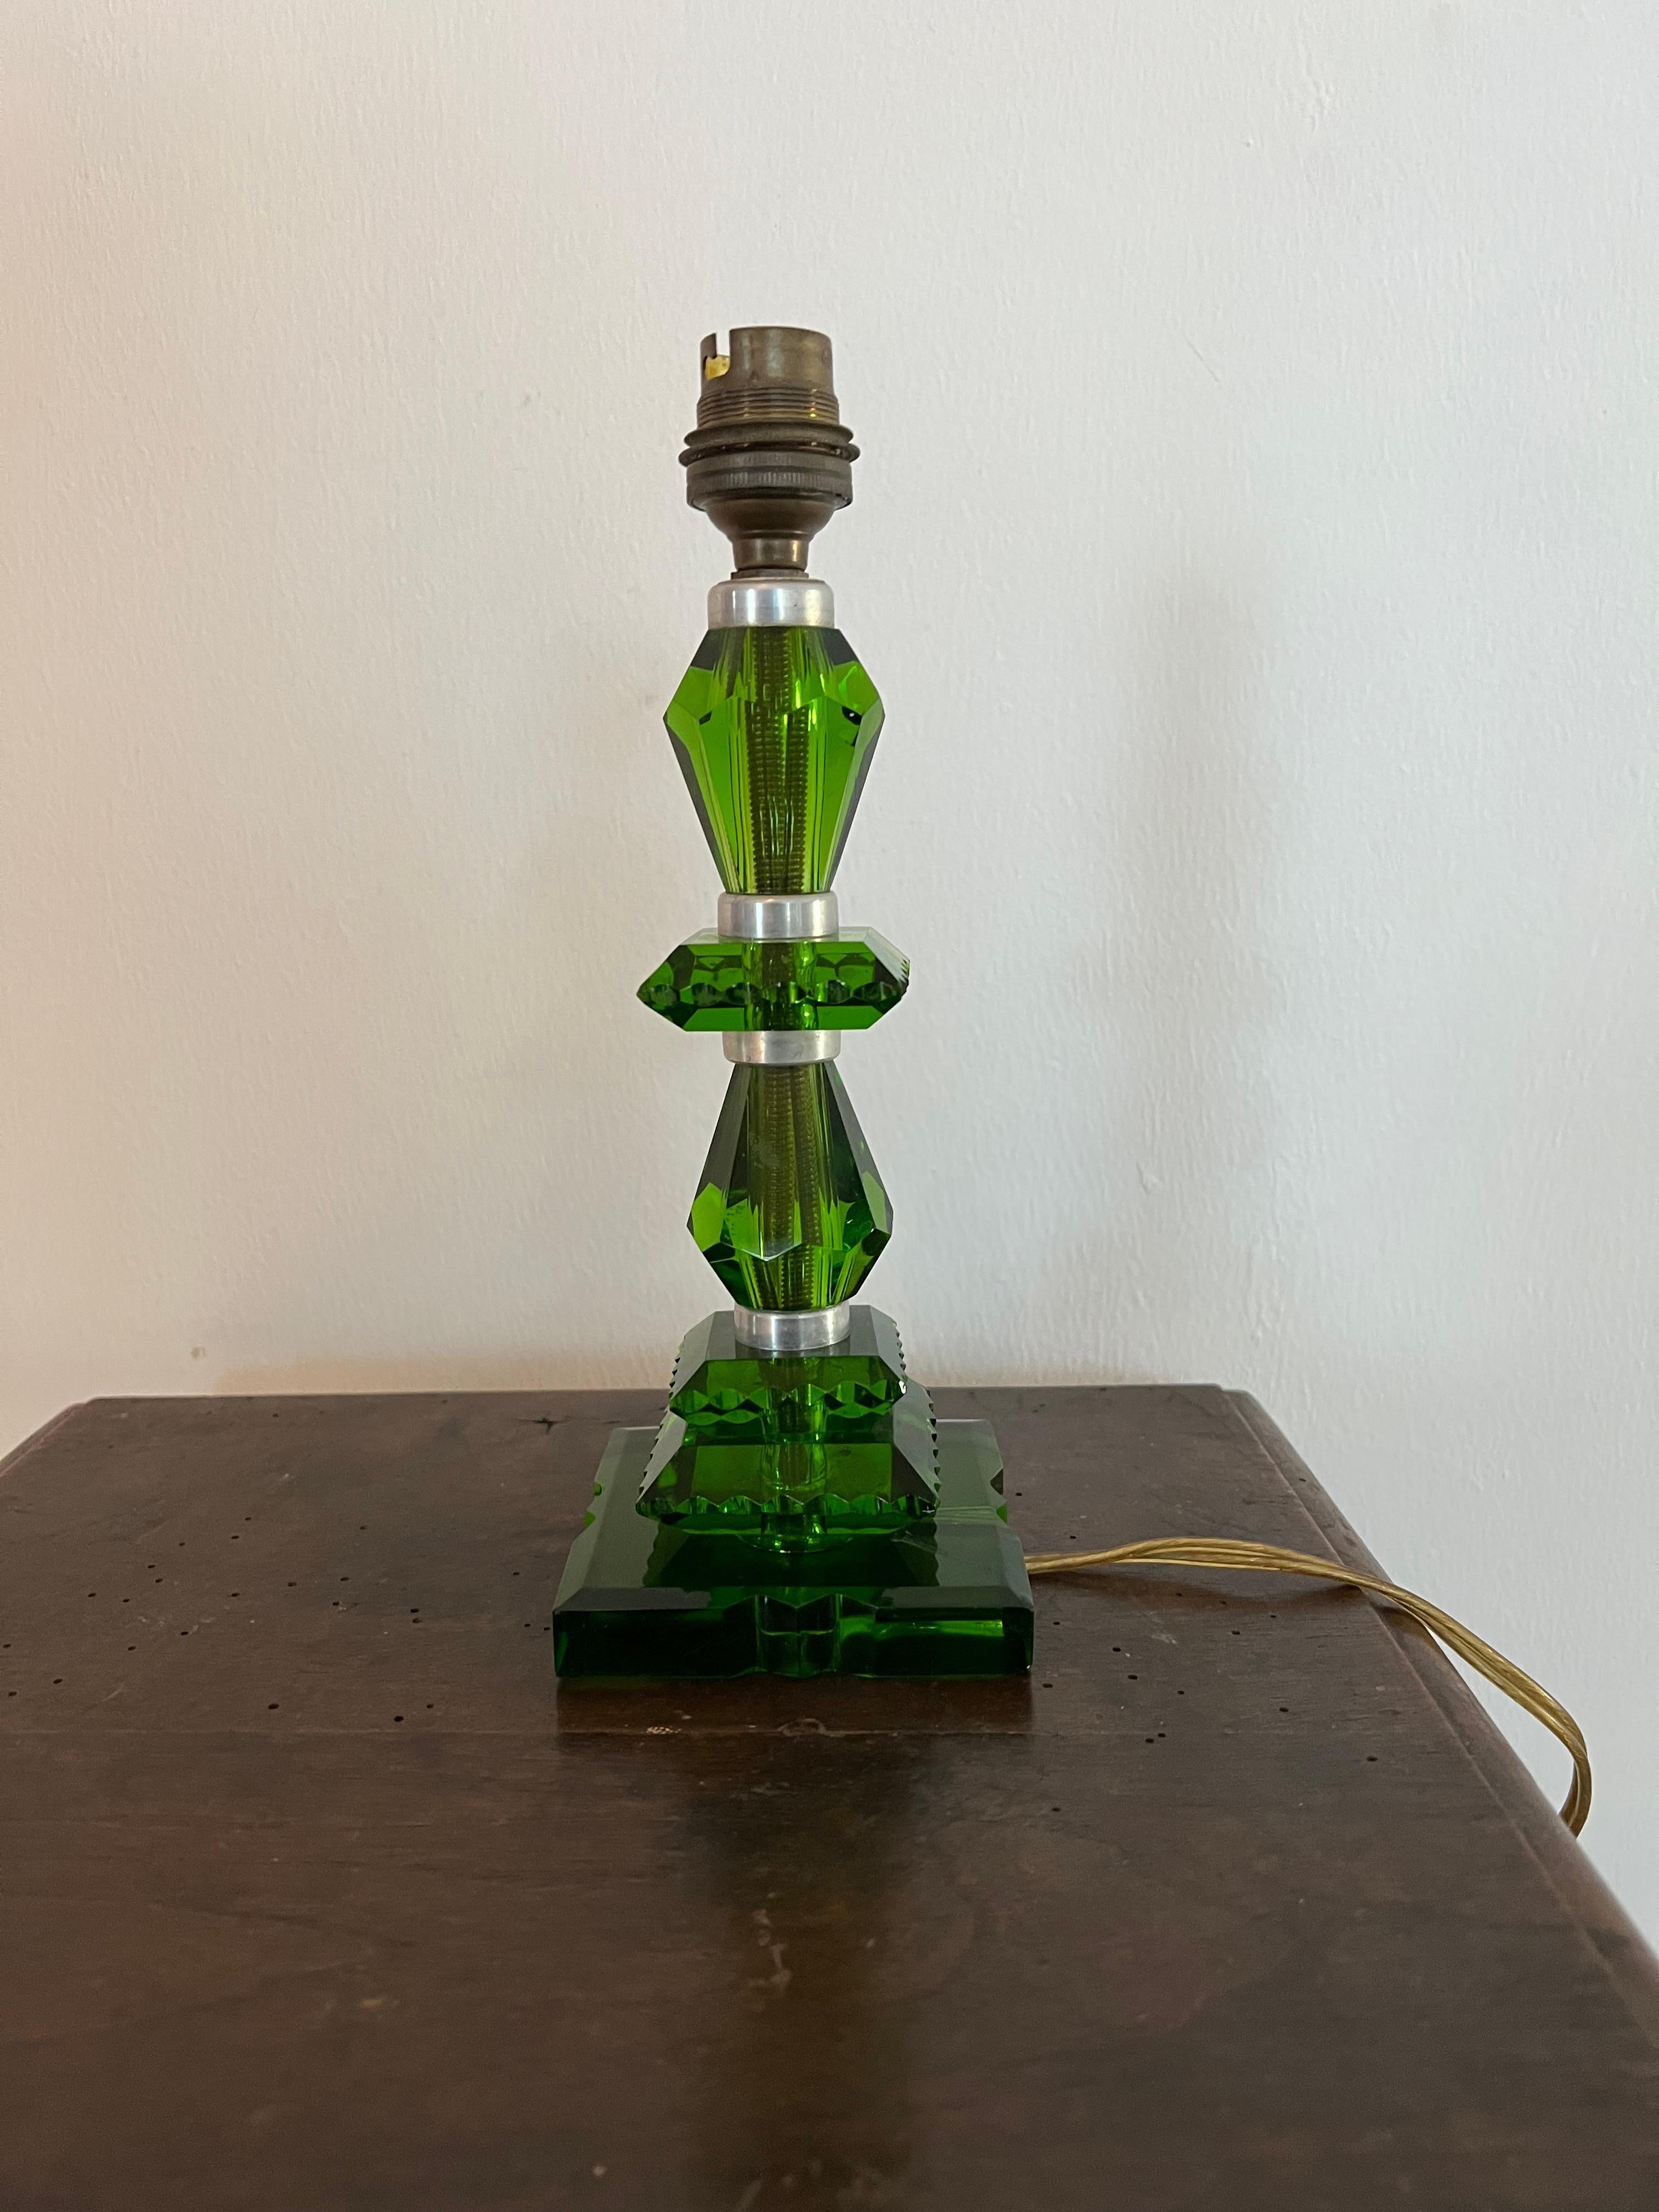 Beautiful Art Deco table lamp in the style of Baccarat and Jacques Adnet, unmarked.
Manufactured in hand cut, vivid emerald green Lead glass.
France circa 1940.
The pieces 